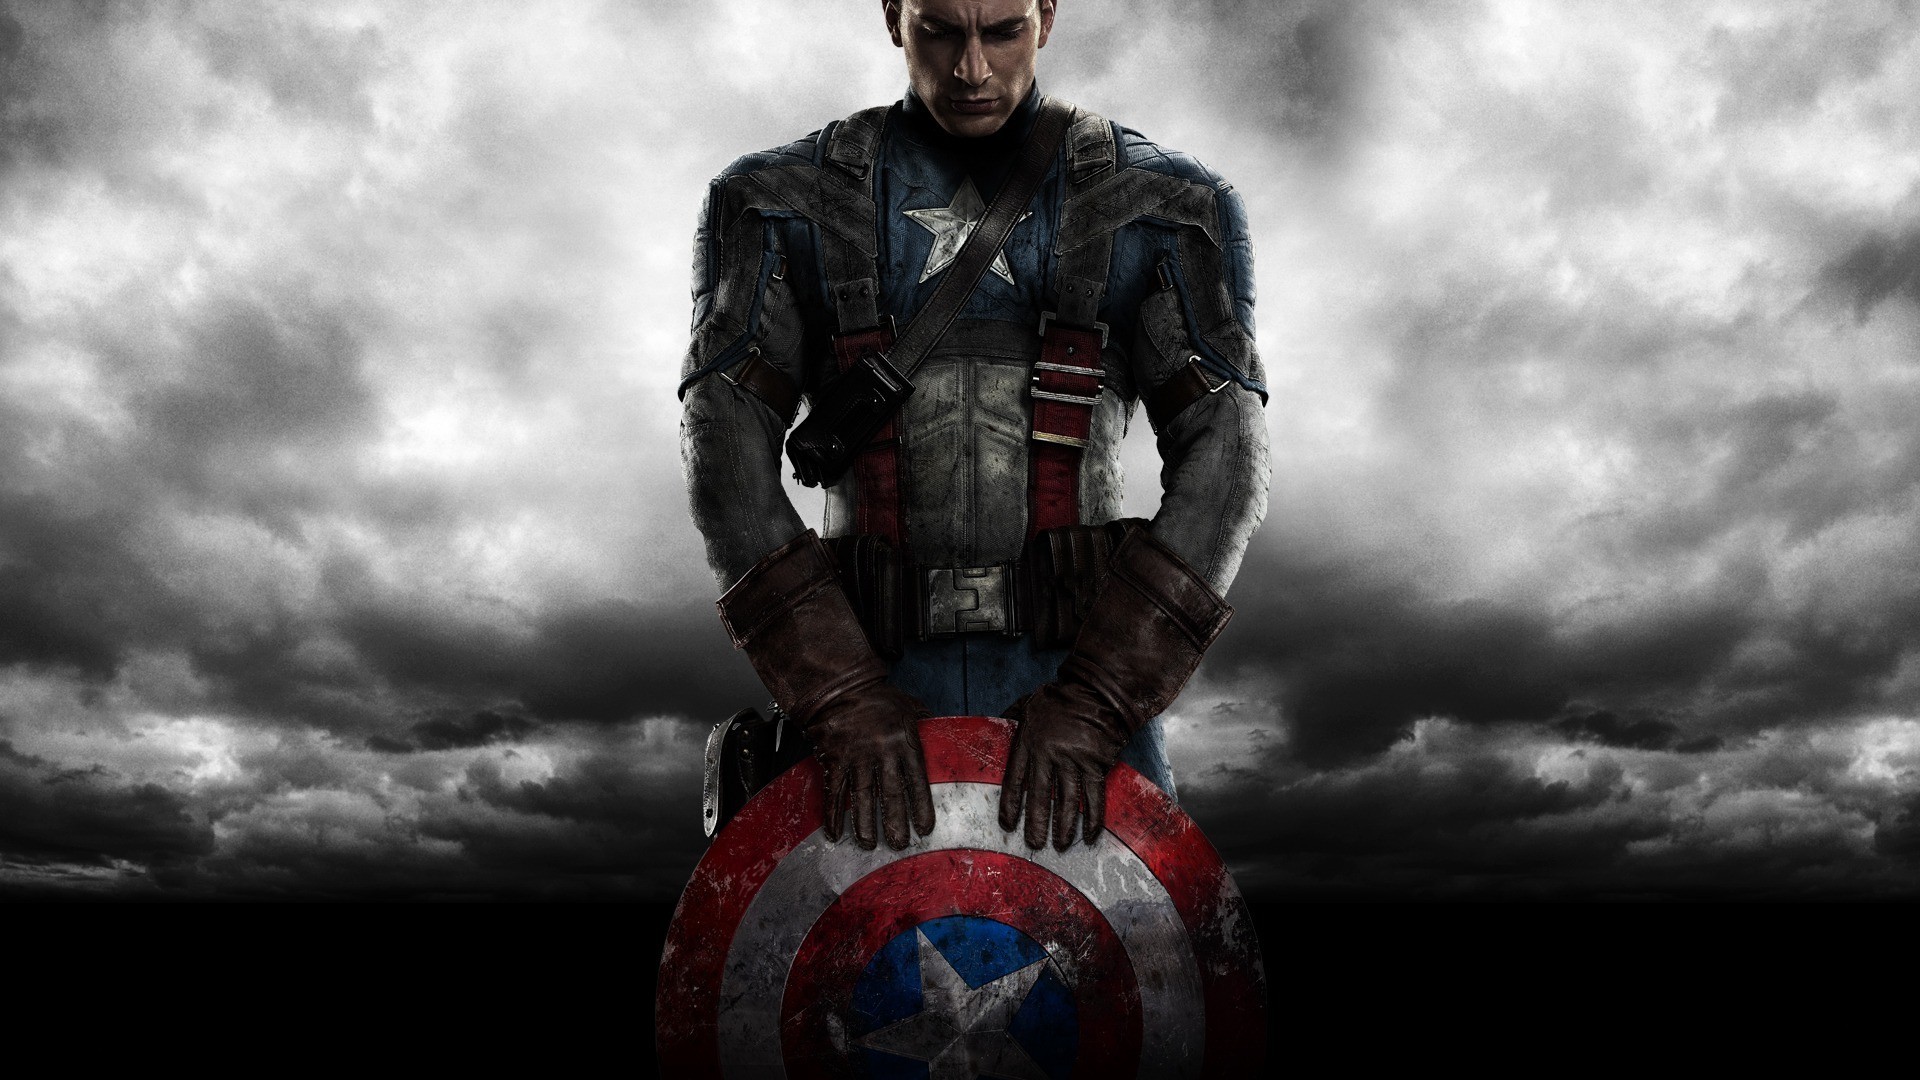 Captain America holding down his shield